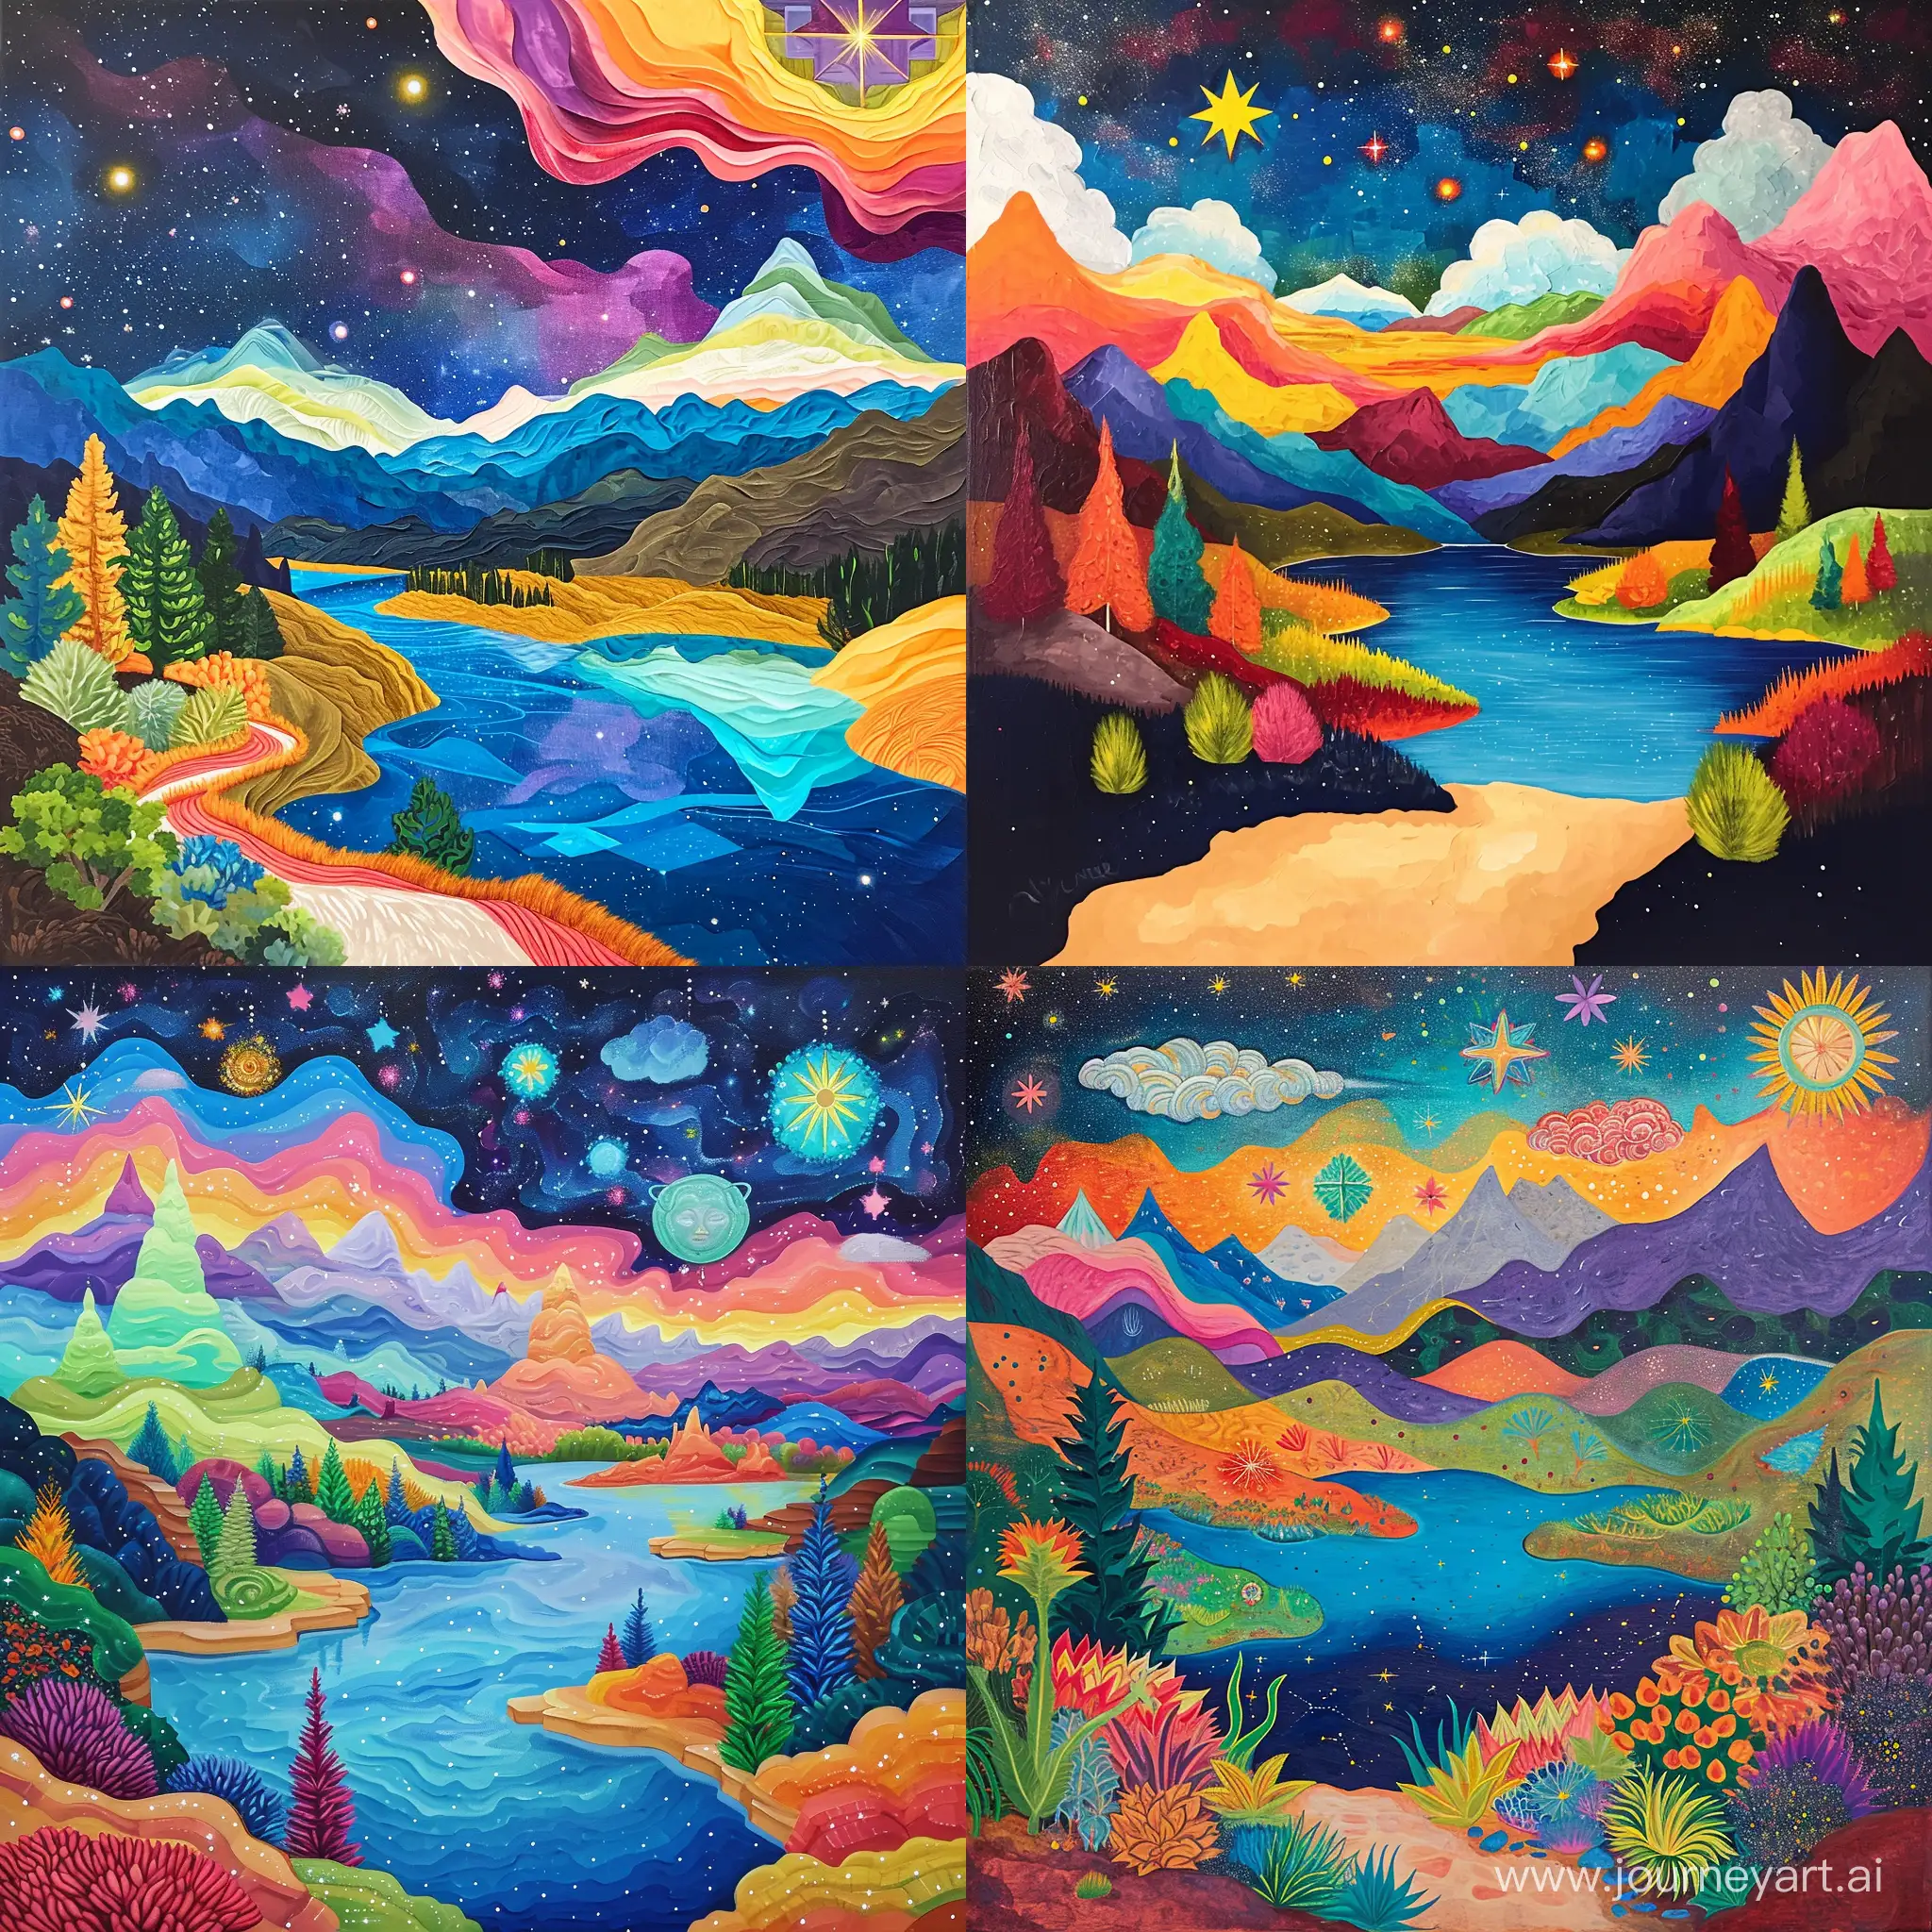 Vibrant-Fantasy-Landscape-with-Mountains-Lake-and-Starry-Sky